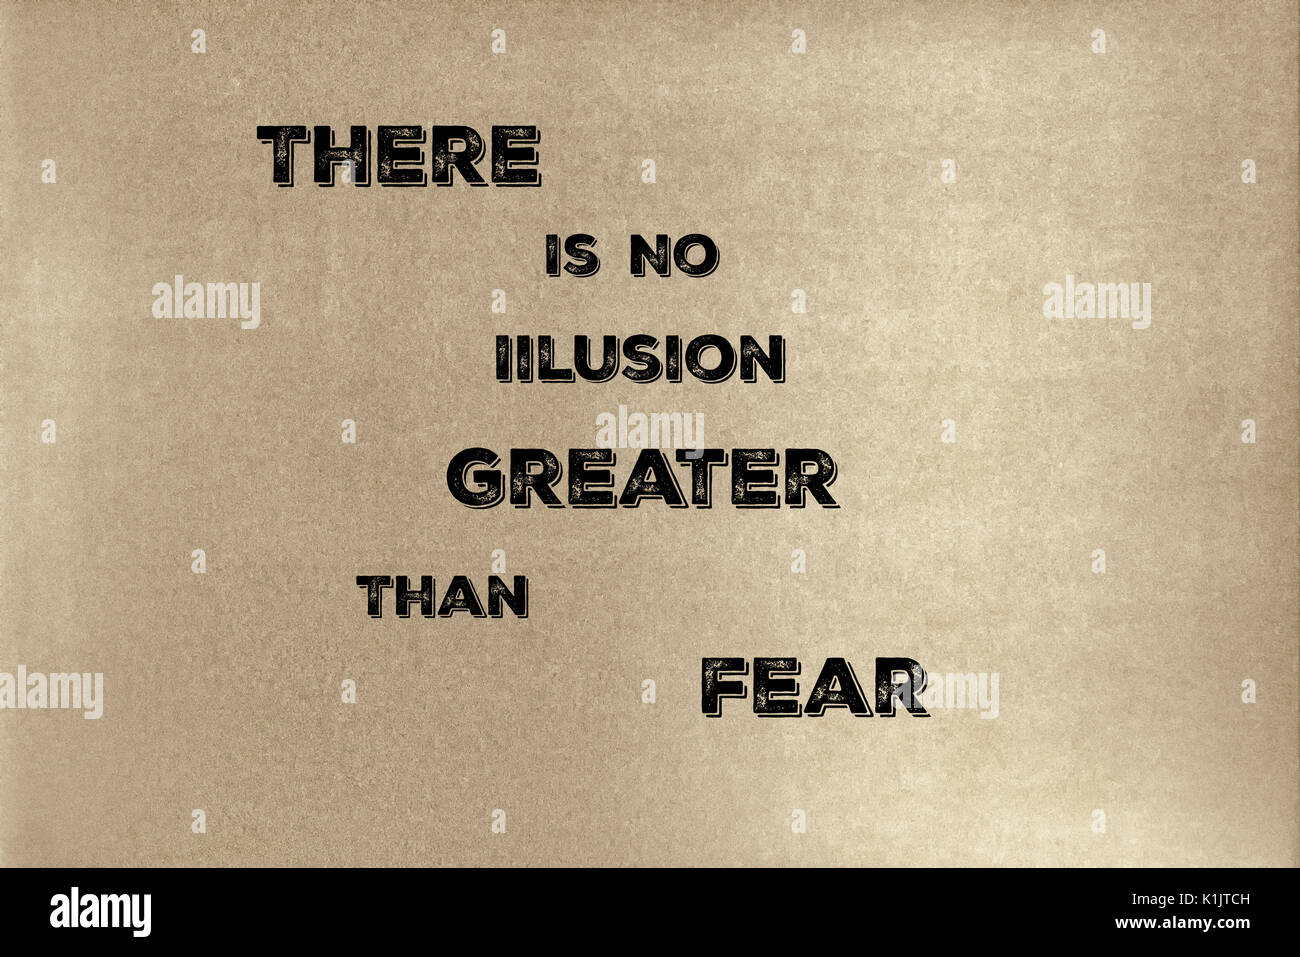 A phrase by Lao Tzu: There is no illusion greater than fear.    Graphic Design. Stock Photo